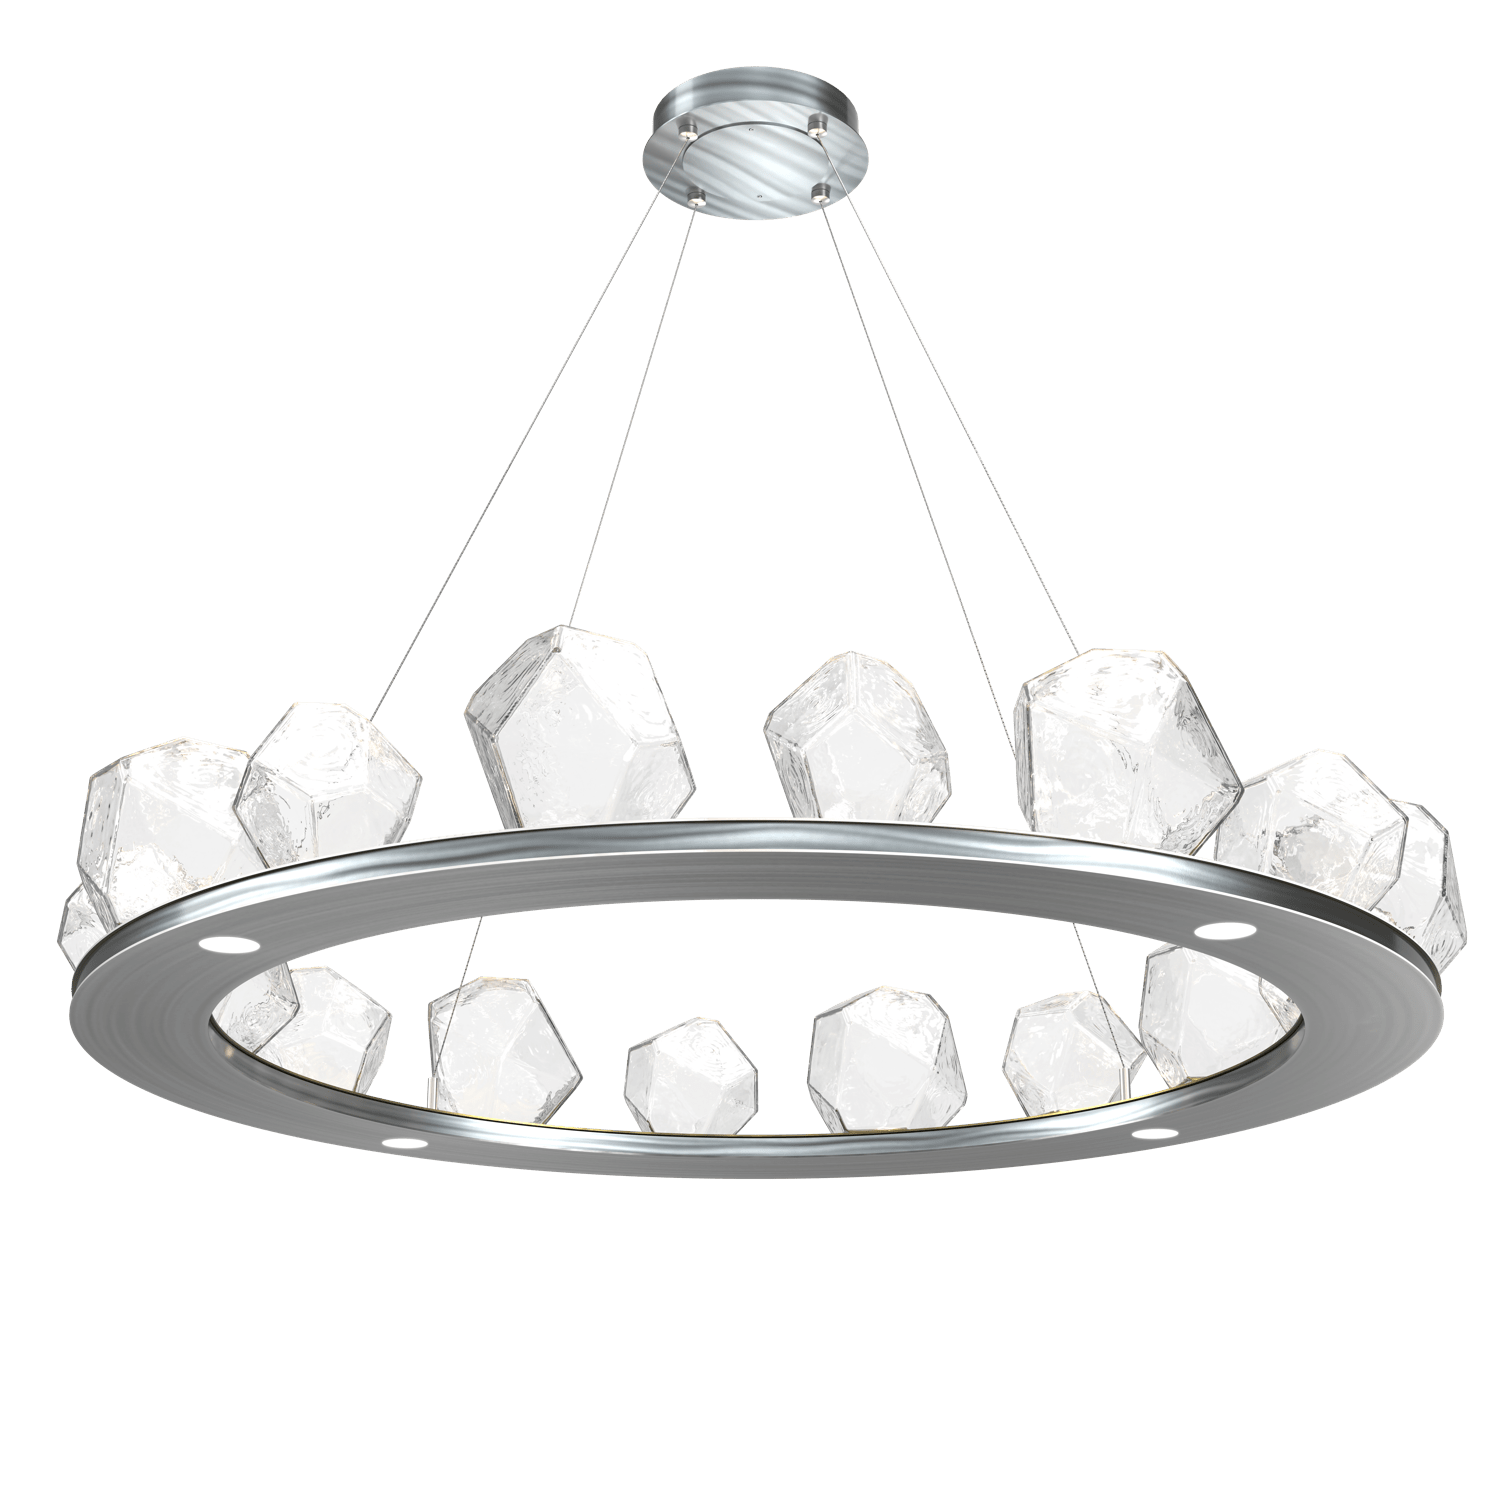 CHB0039-0D-SN-C-Hammerton-Studio-Gem-48-inch-ring-chandelier-with-satin-nickel-finish-and-clear-blown-glass-shades-and-LED-lamping